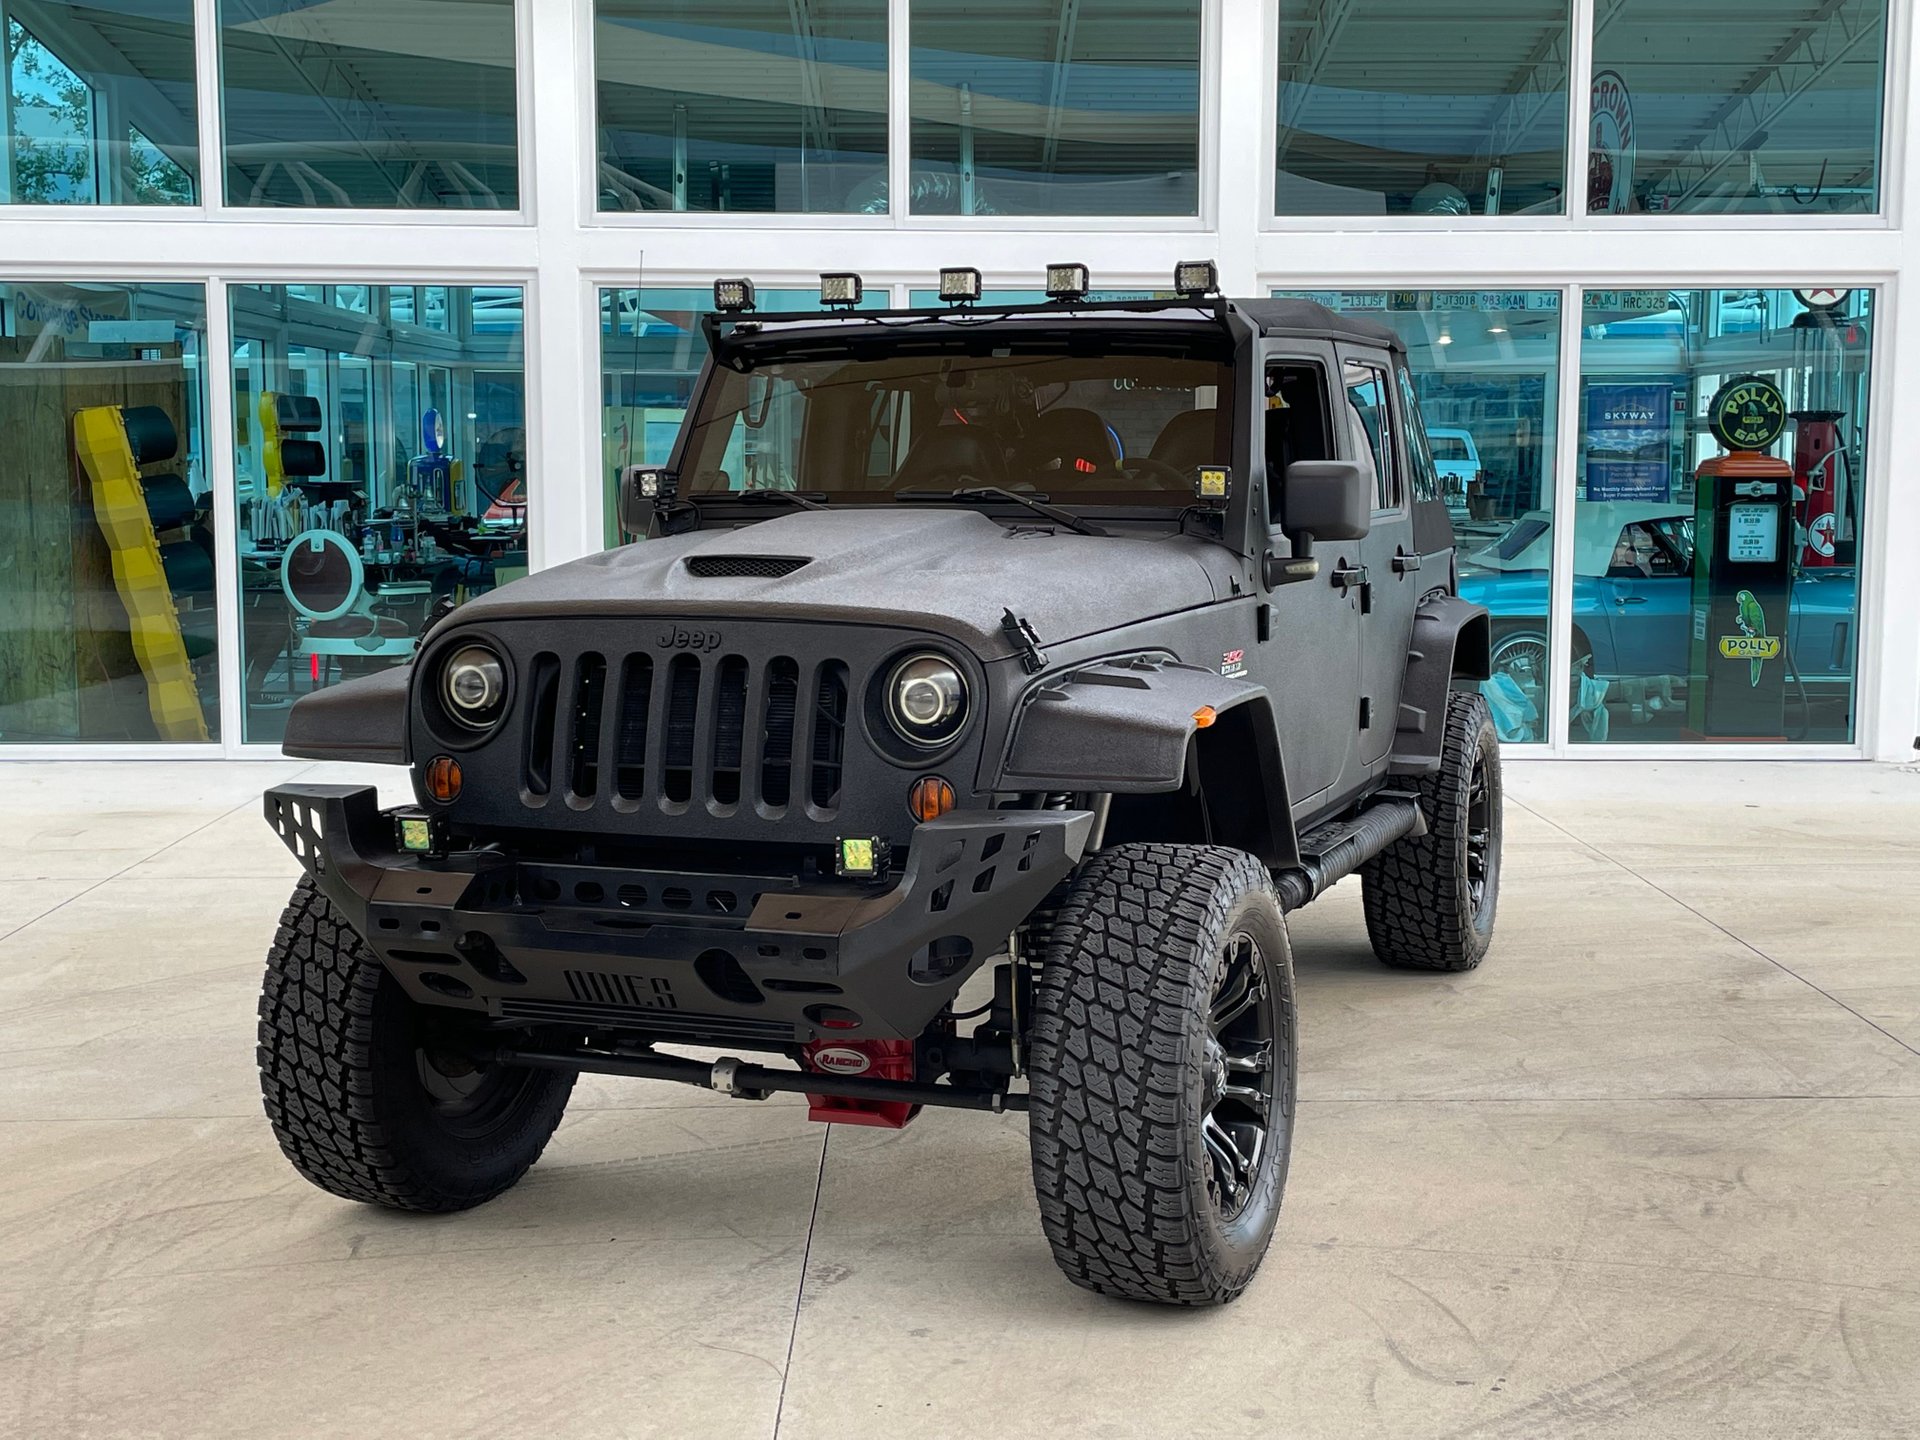 2007 Jeep Wrangler Unlimited Rubicon Custom for sale #293092 | Motorious